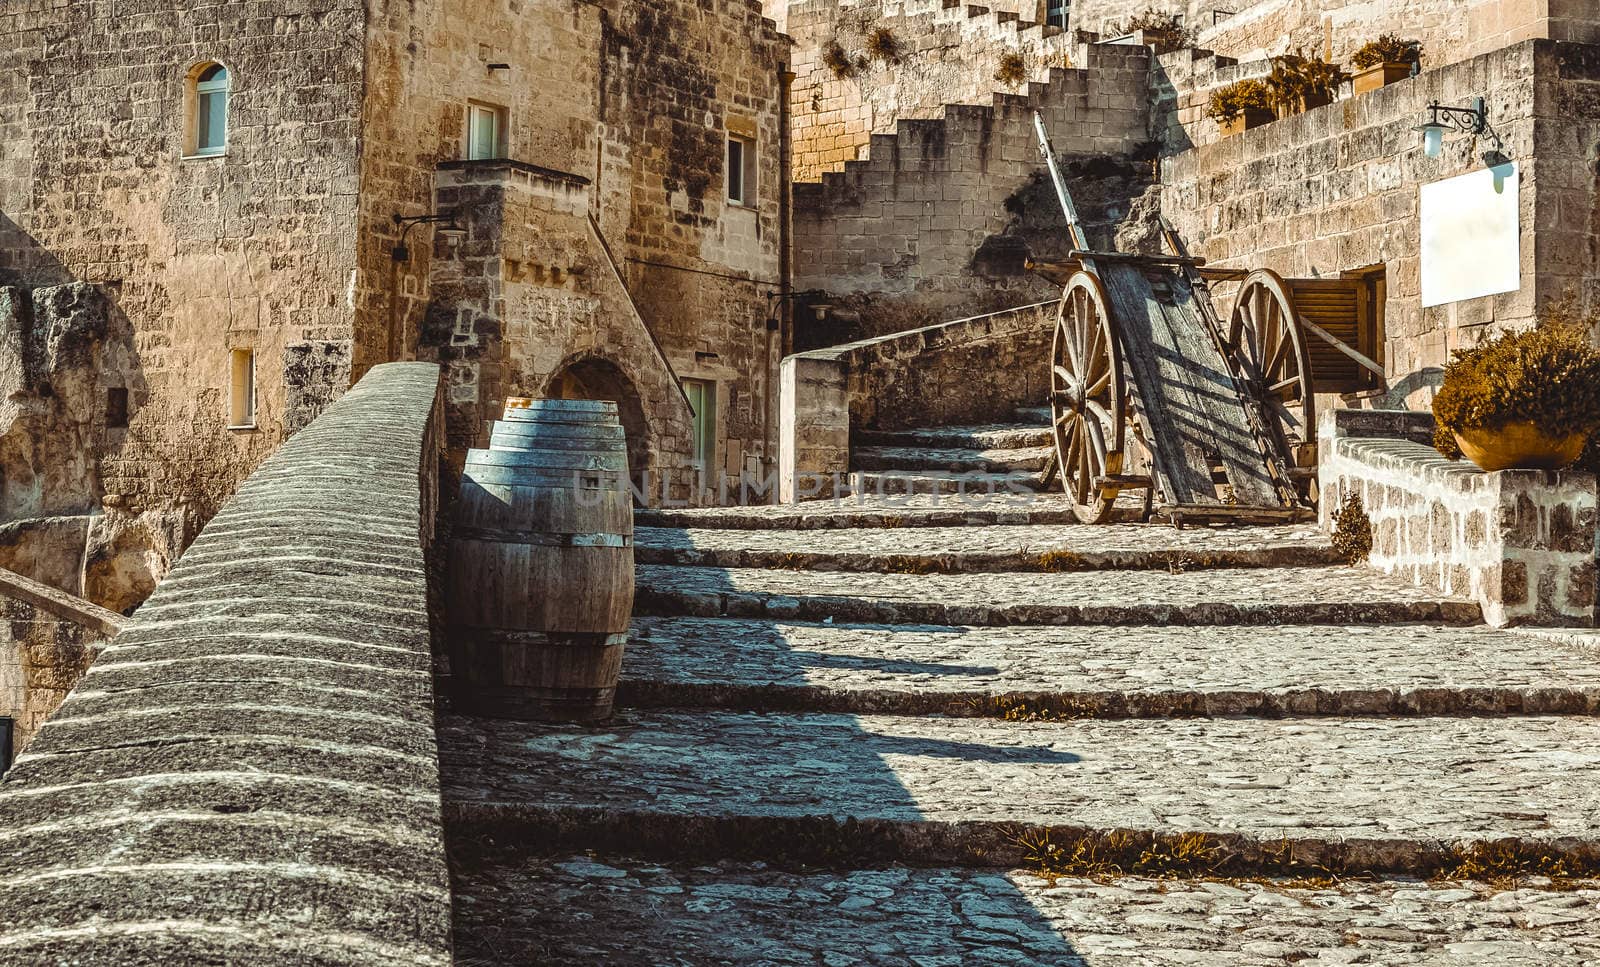 old historical scene with wood wagon and wine barrels typical tool used in Matera in the past, old style by donfiore